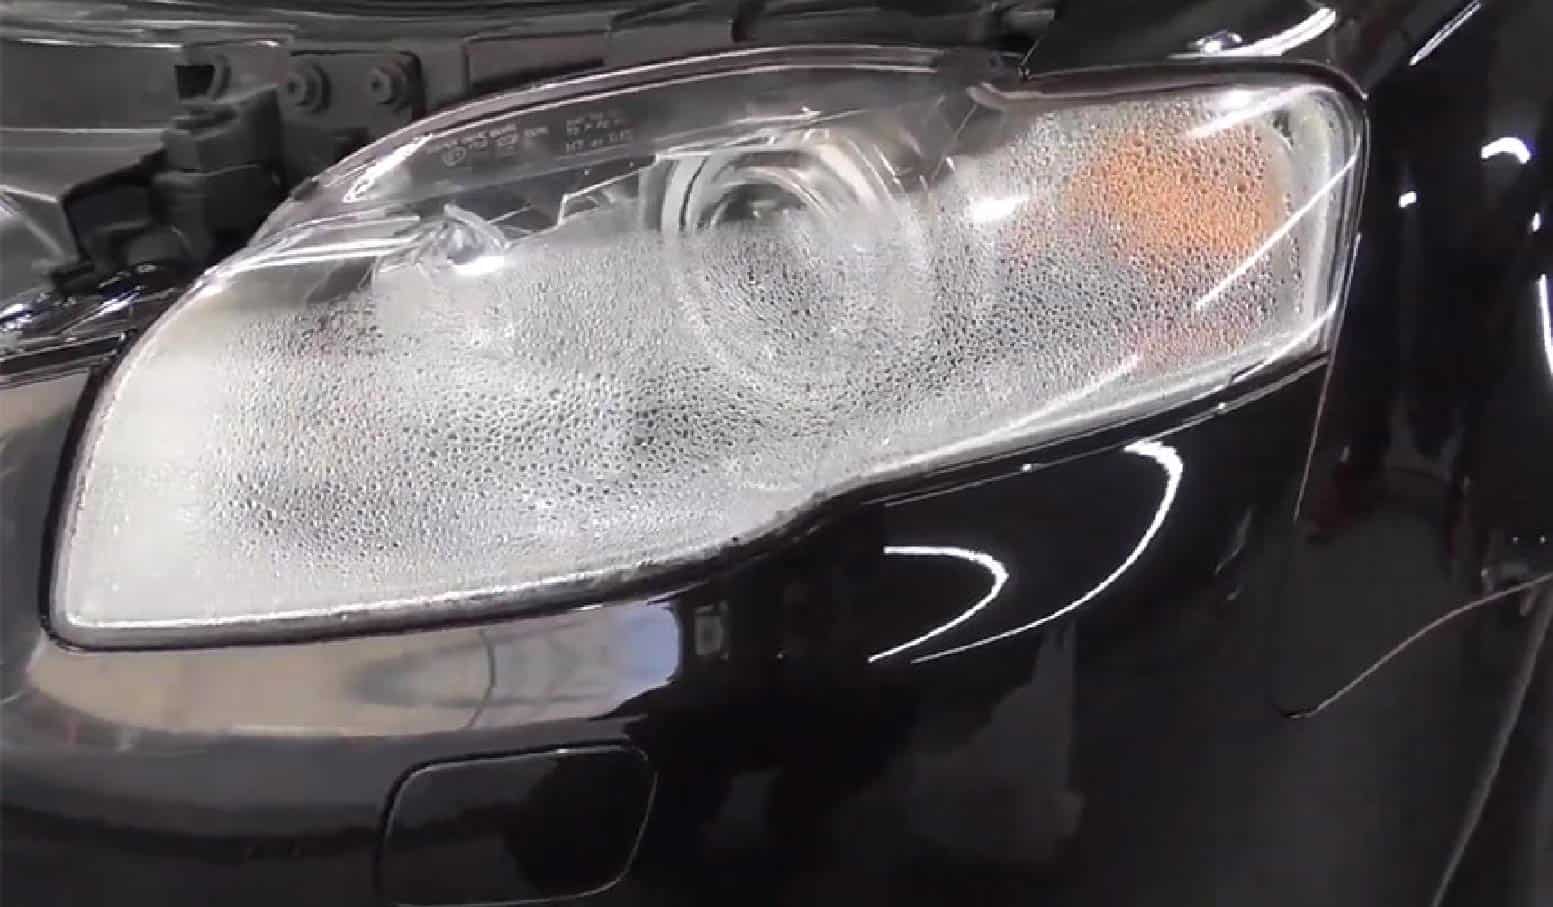 How to remove moisture from headlights